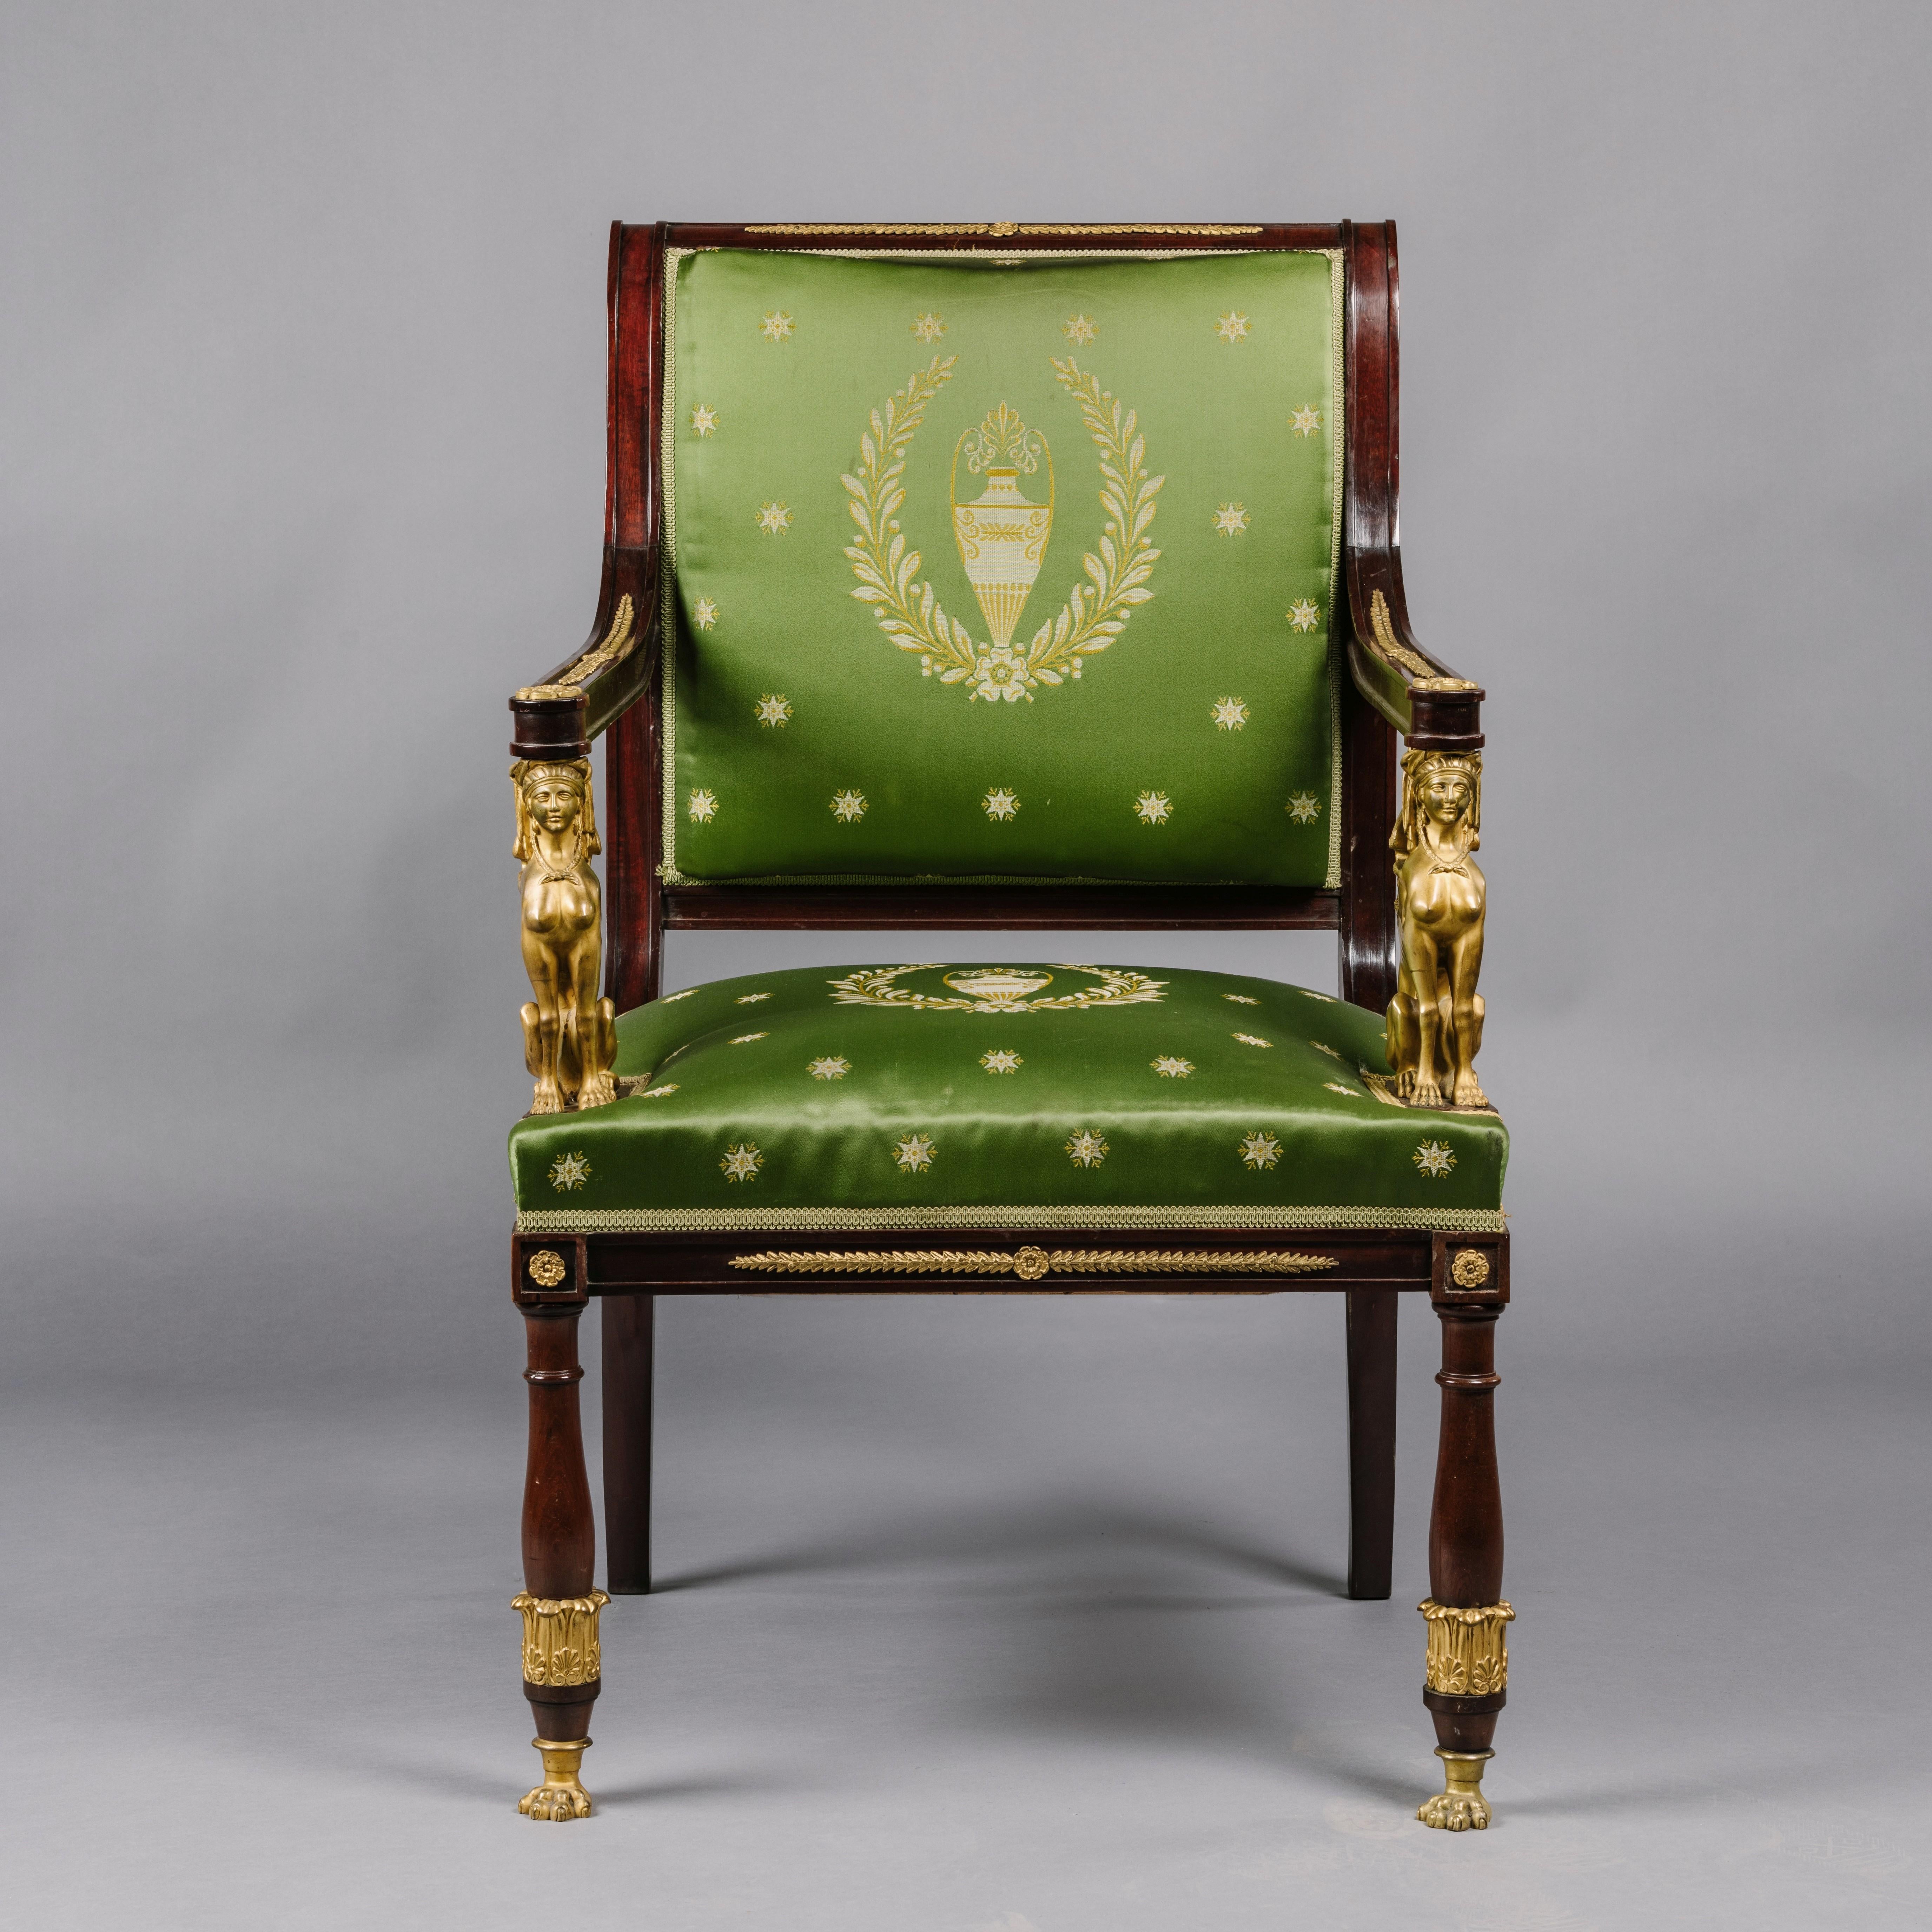 A fine empire revival gilt-bronze mounted mahogany fauteuil.

This elegant armchair has a scrolled mahogany frame with a padded upholstered back and seat, the arms put down on finely cast gilt-bronze seated sphinx above an apron mounted with